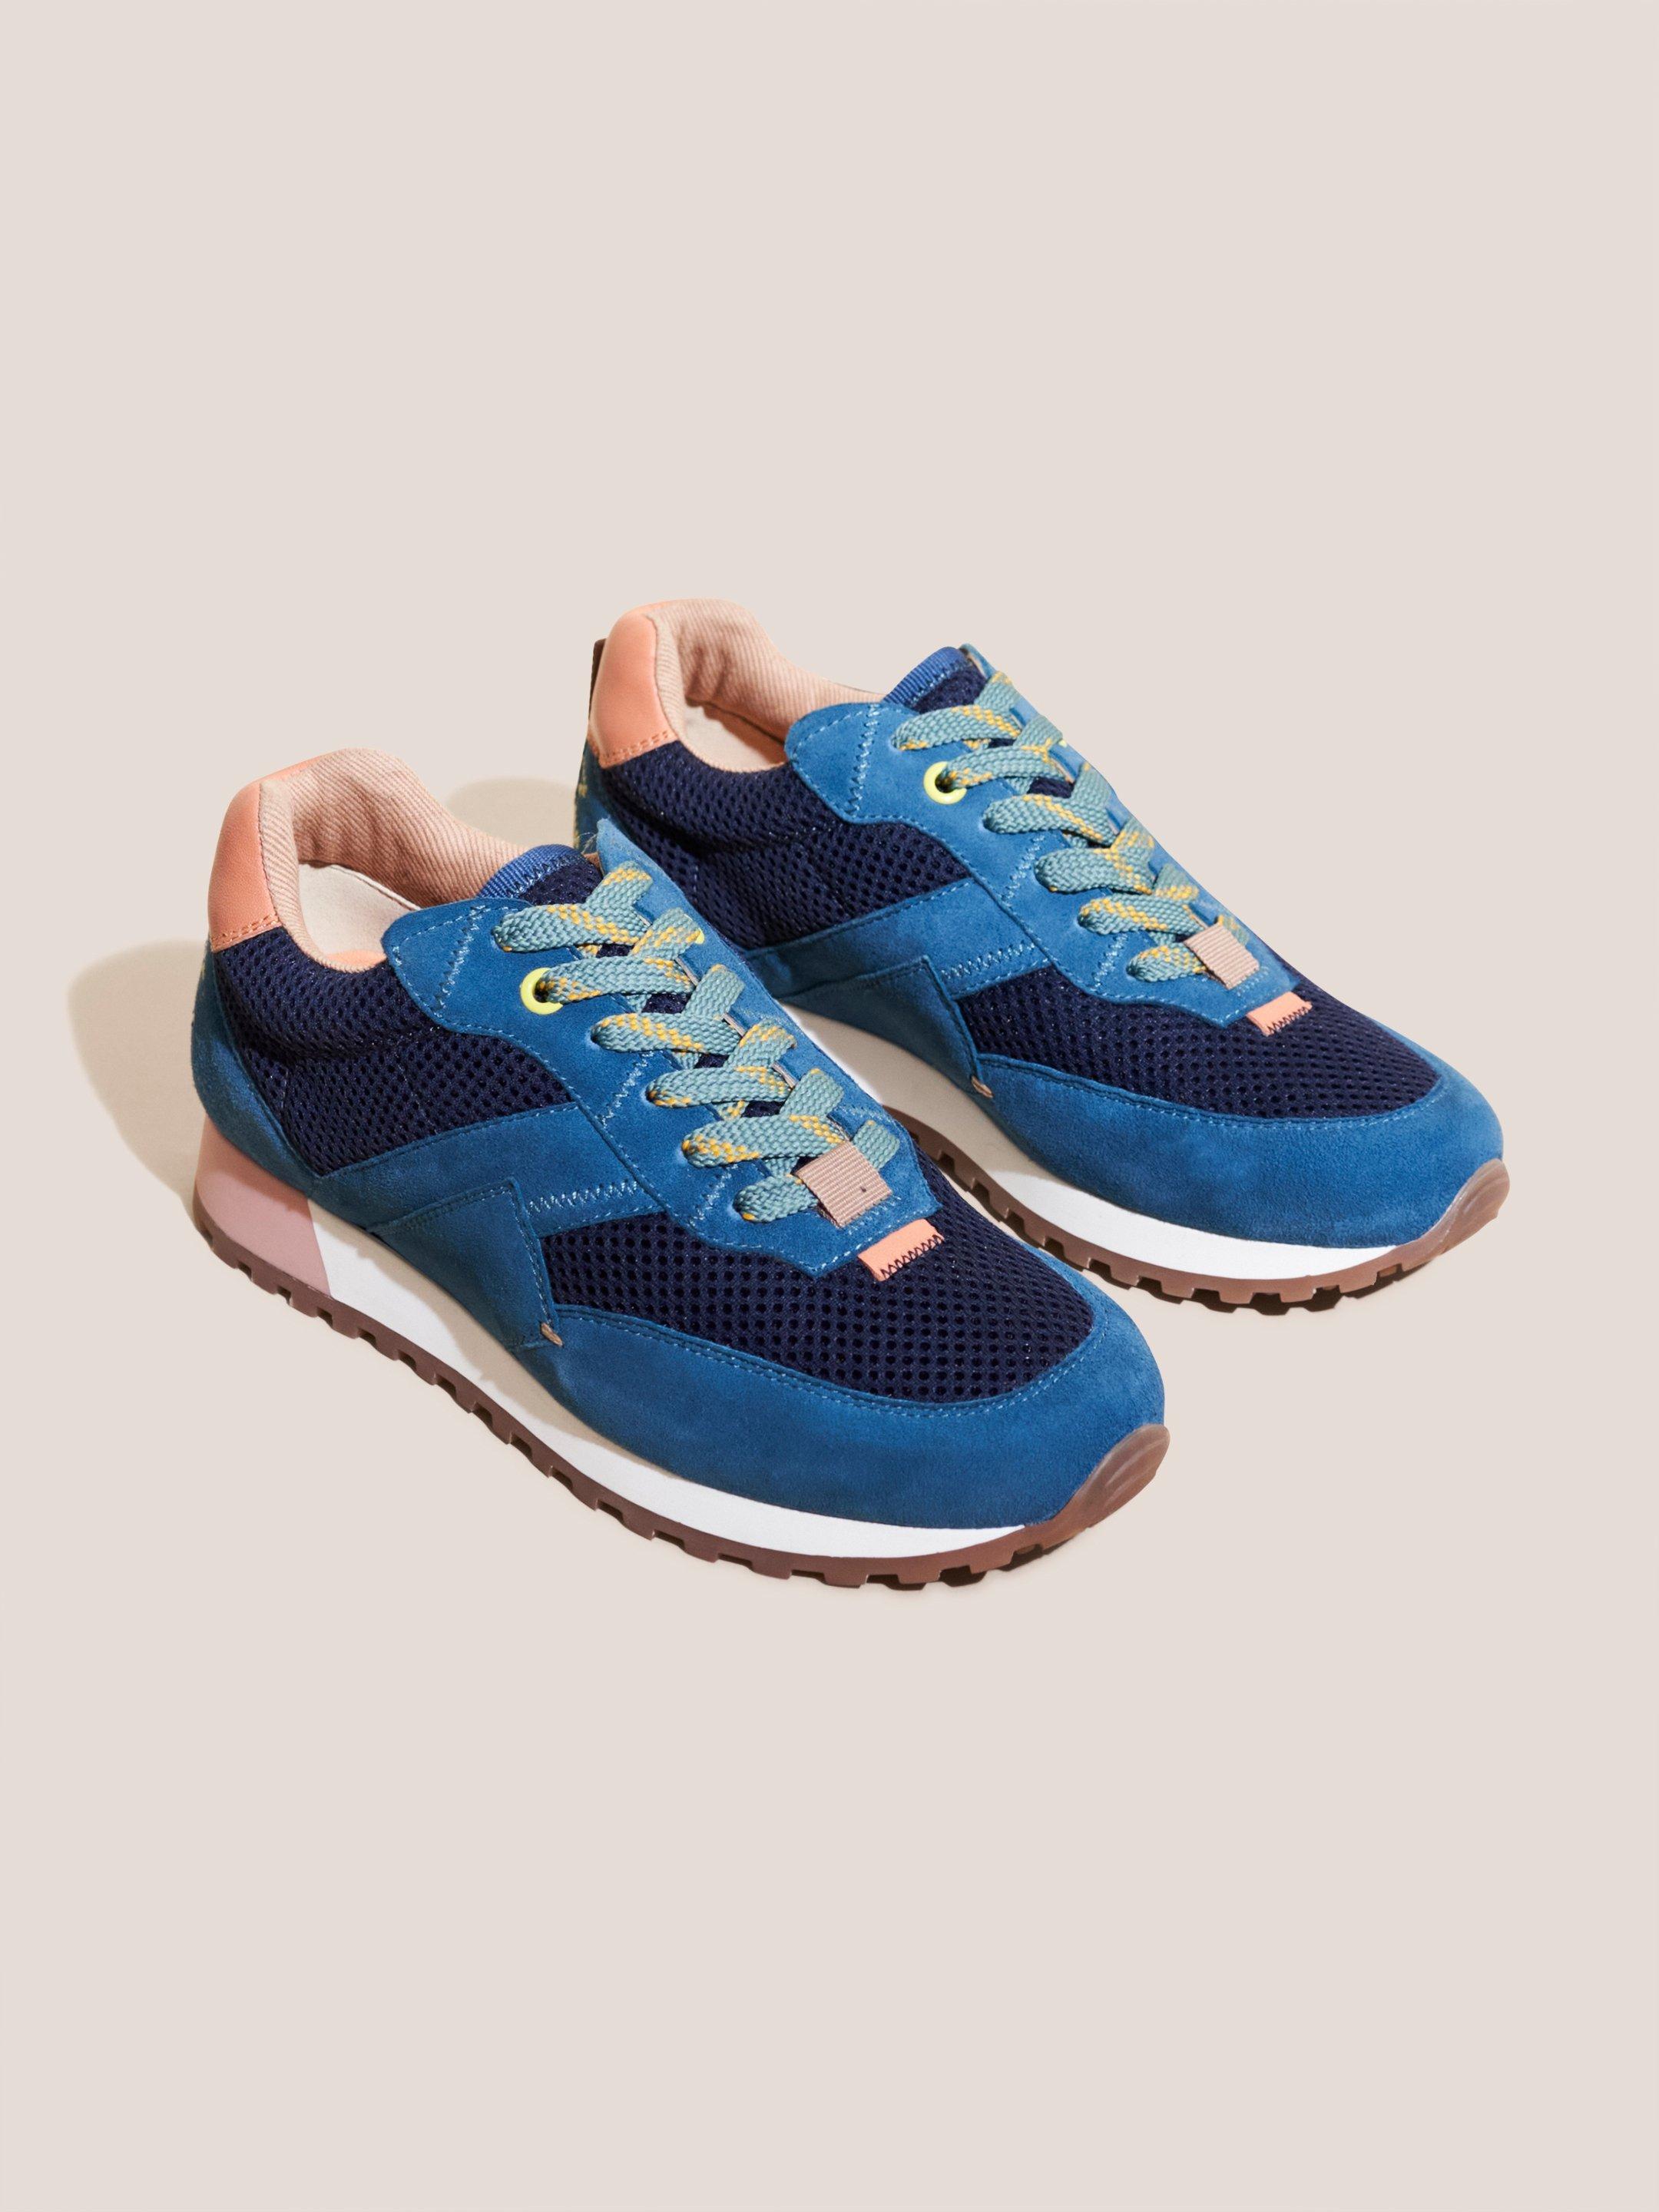 Retro Sports Trainers in BLUE MLT - FLAT FRONT